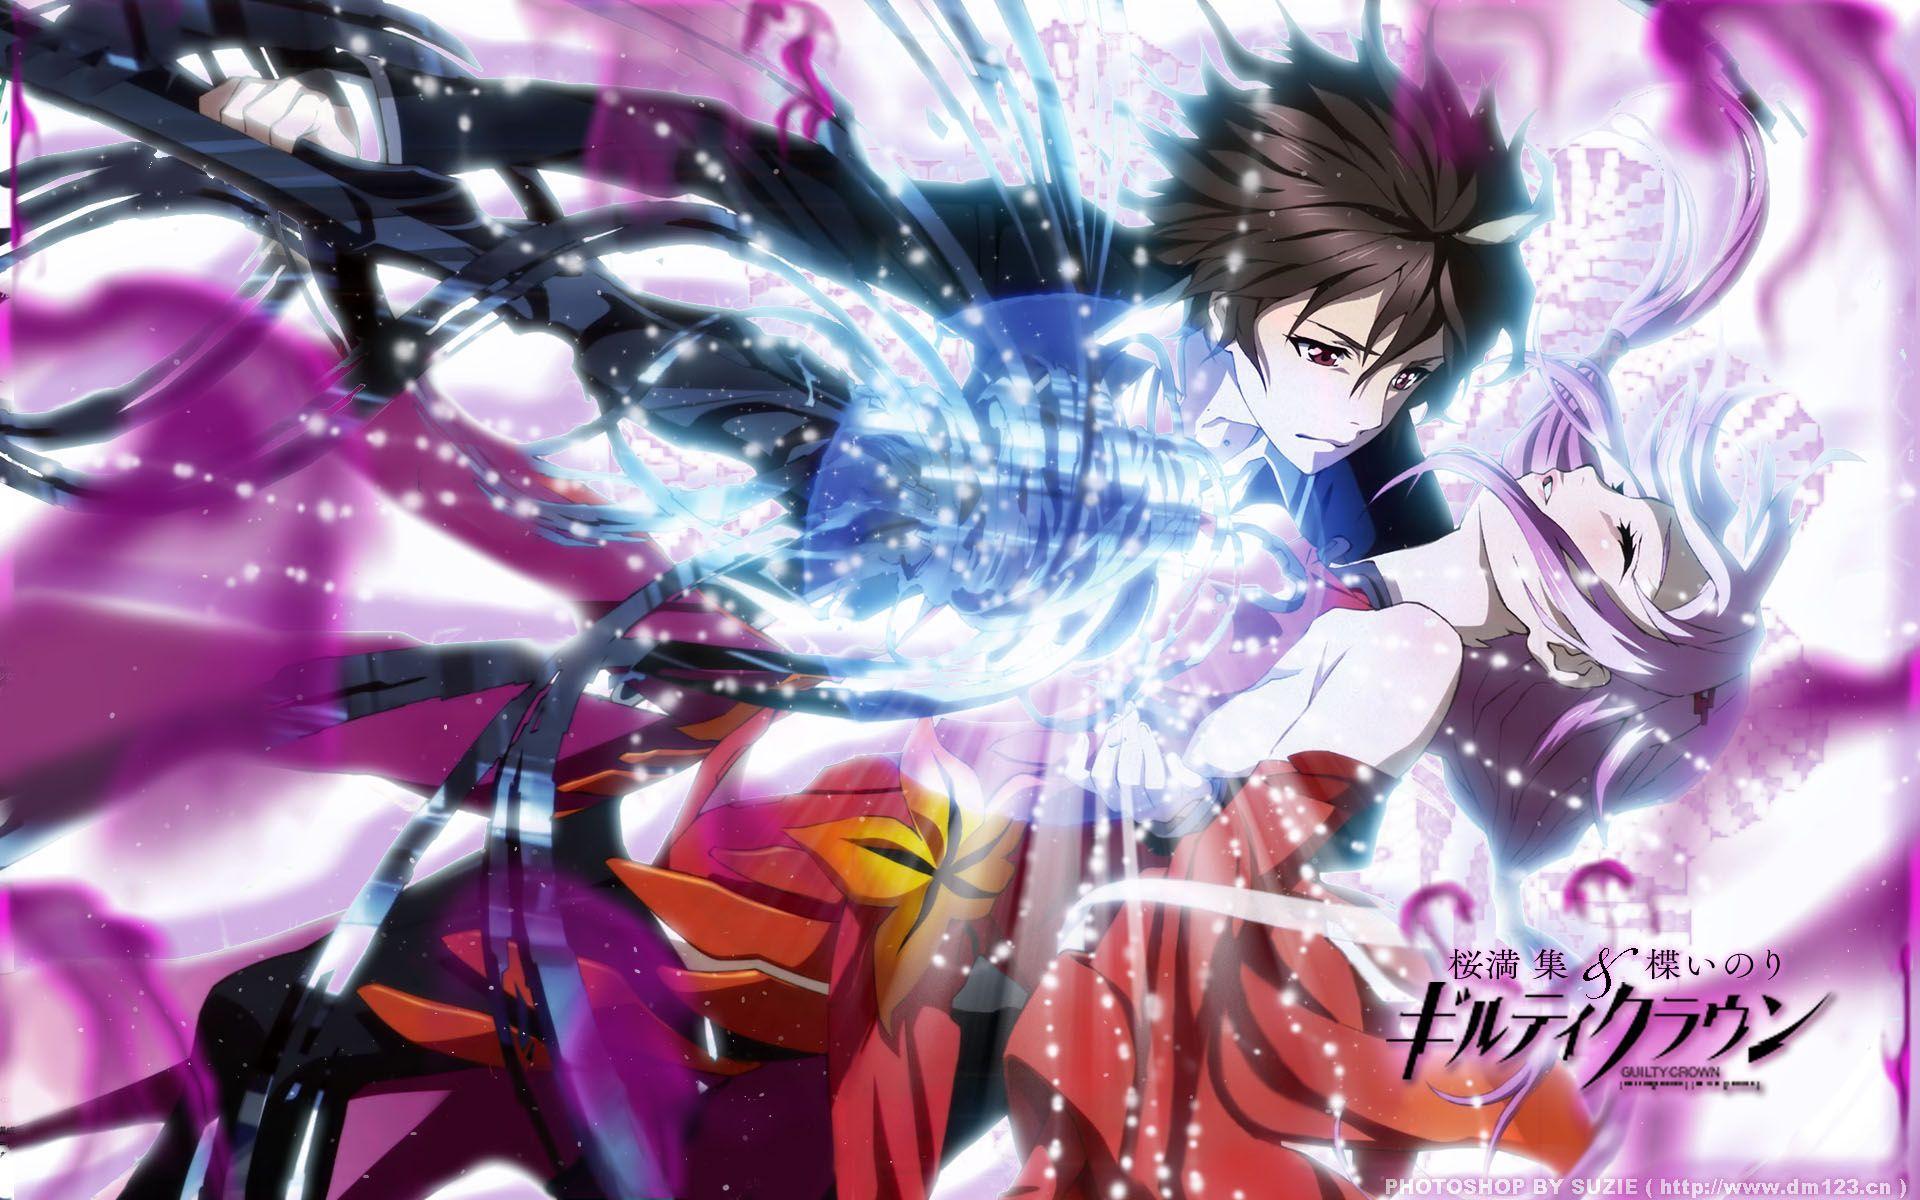 Anime - Guilty Crown Wallpaper  Guilty crown wallpapers, Hd anime